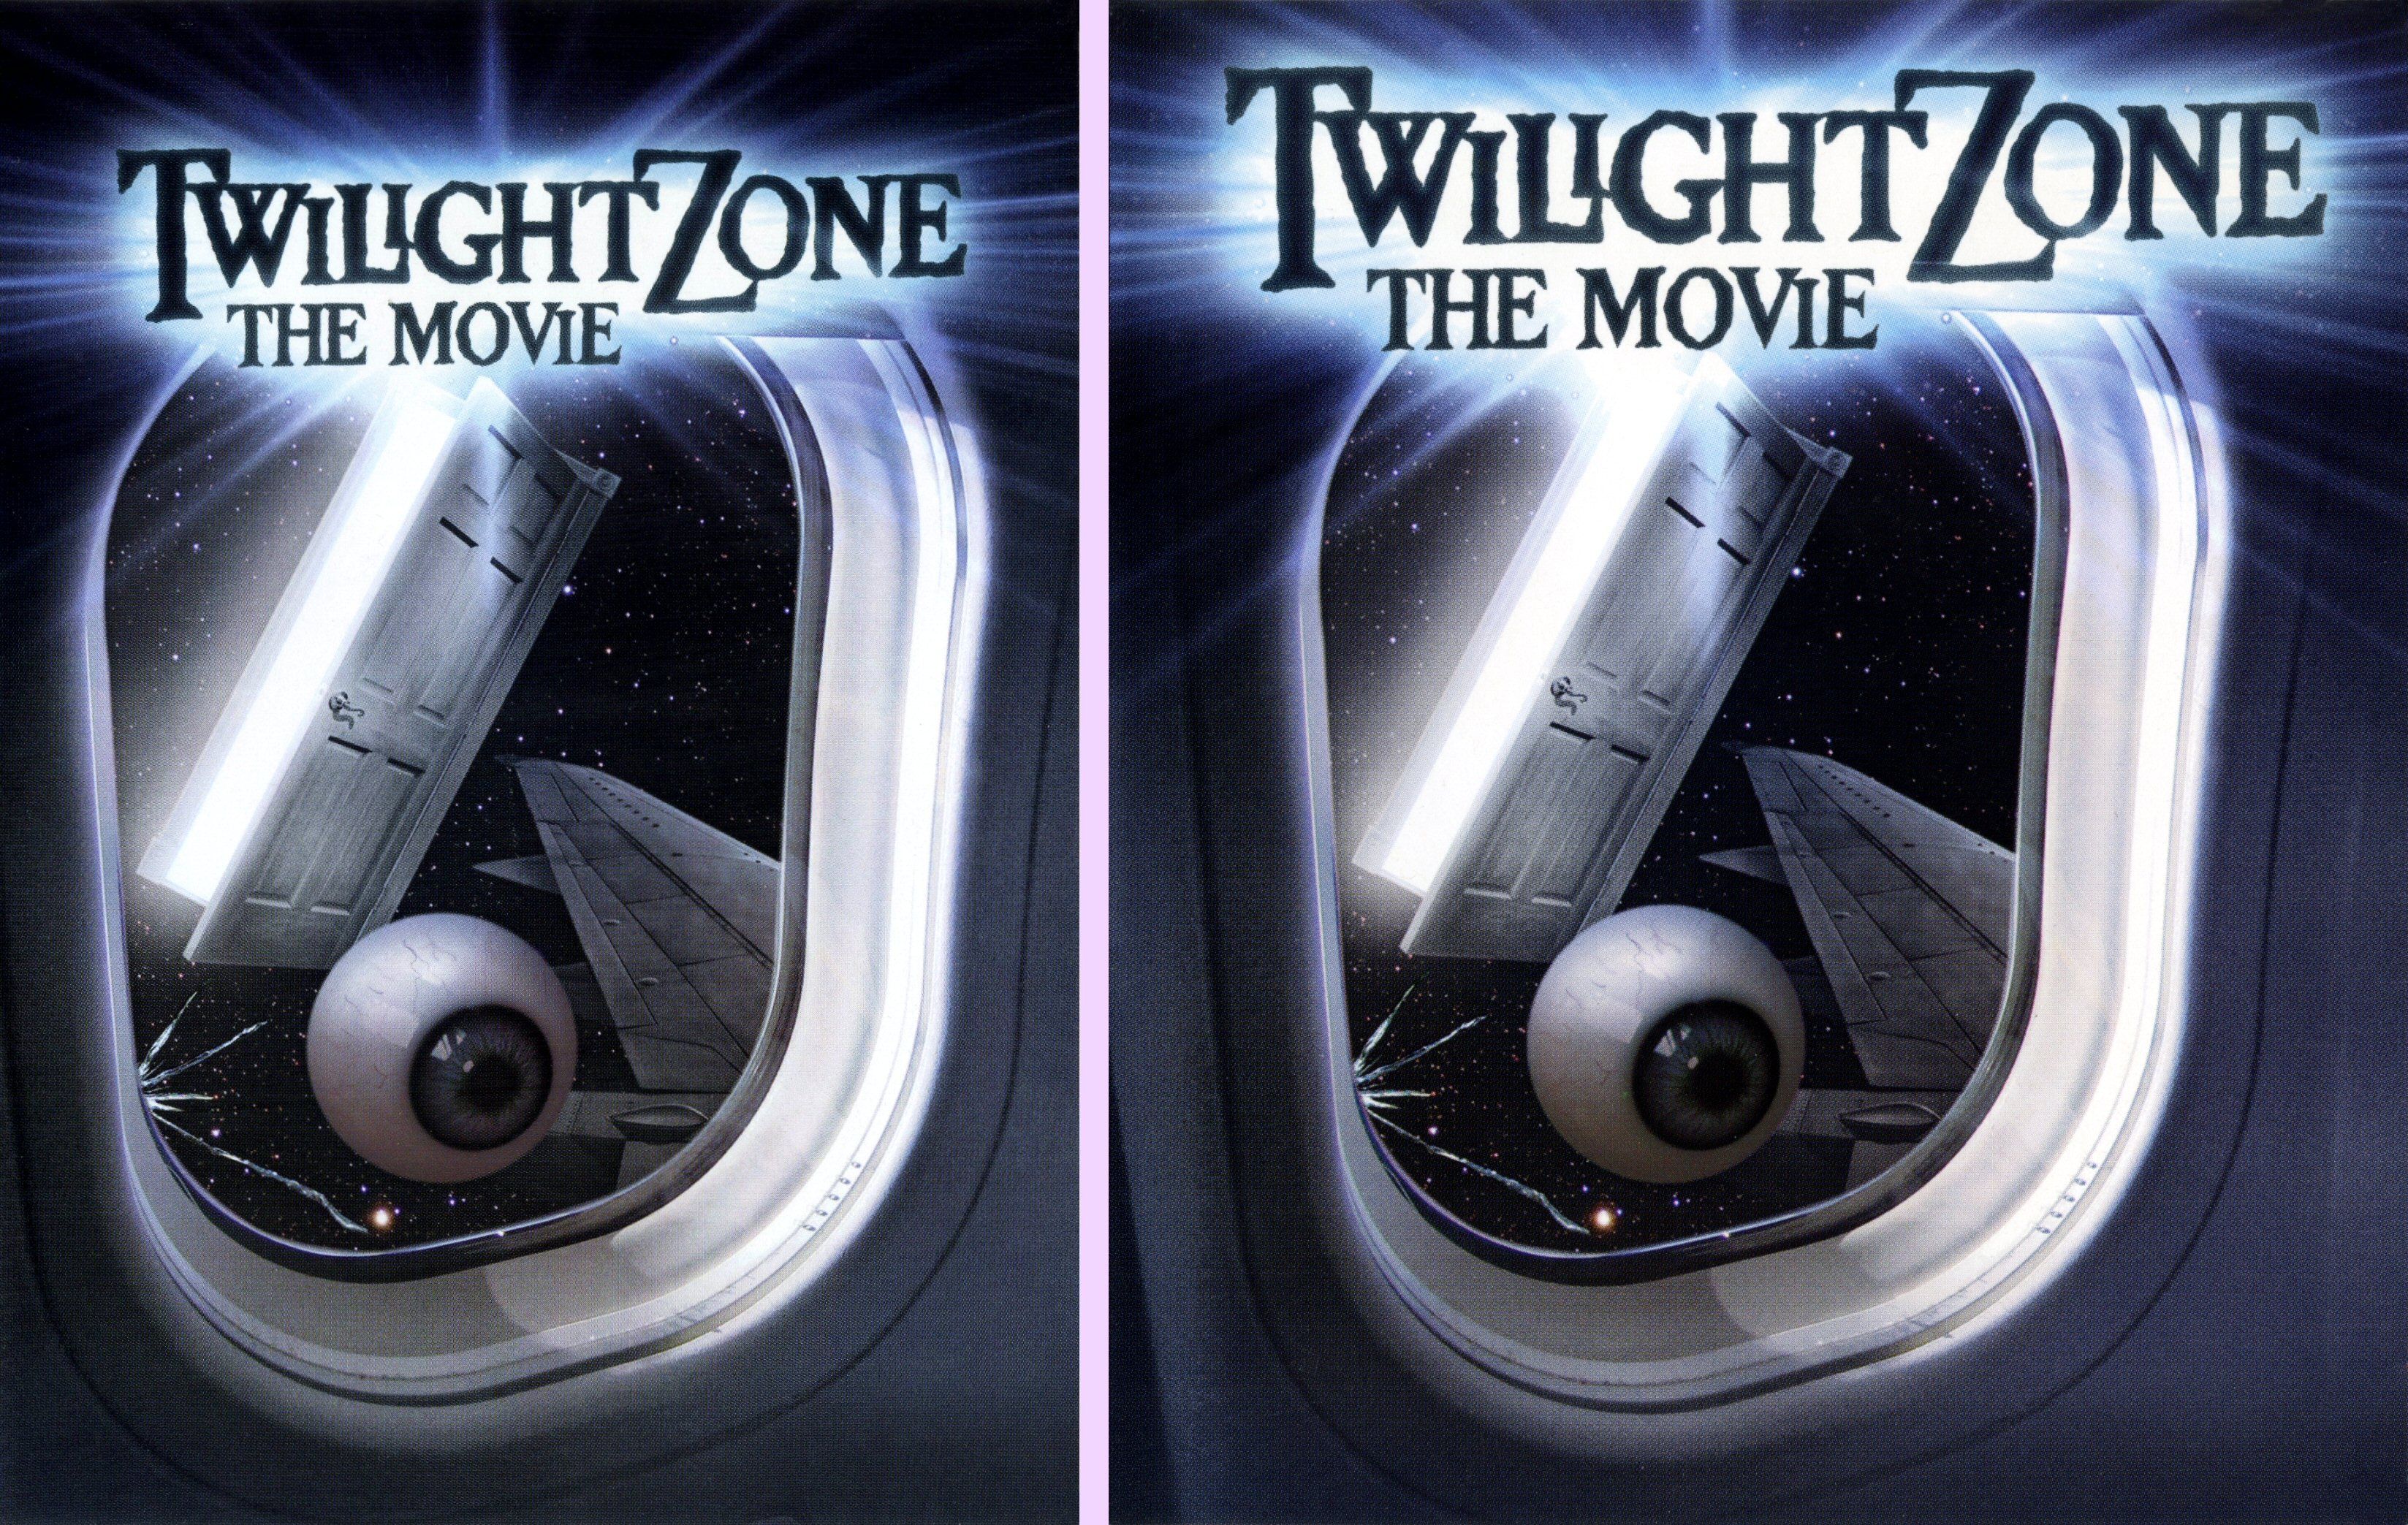 DVD Exotica: Let's Talk About Twilight Zone: The Movie